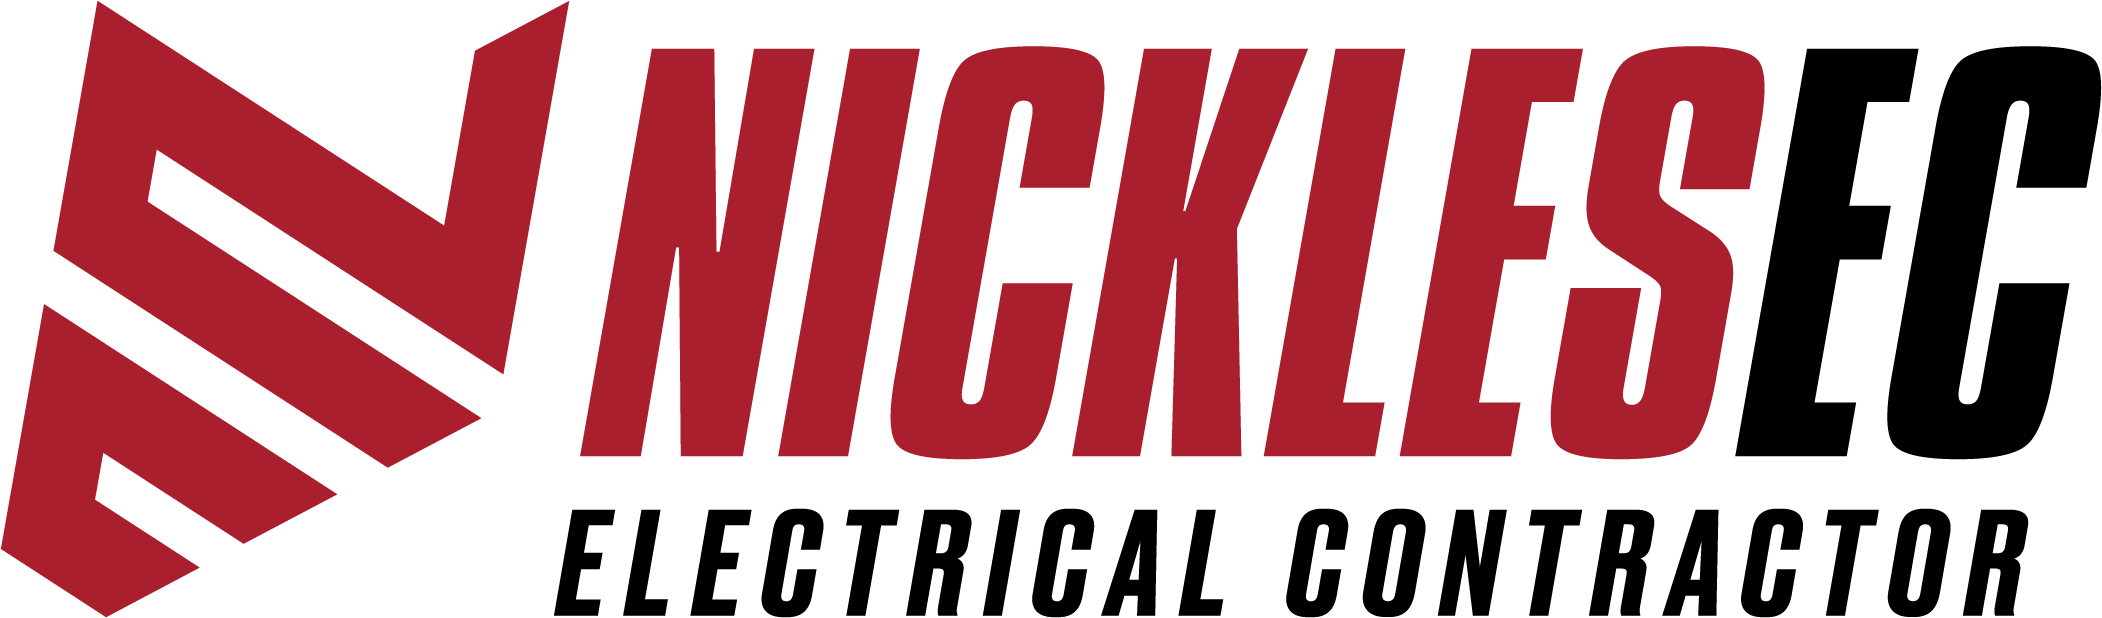 Nickles Electrical Contractor